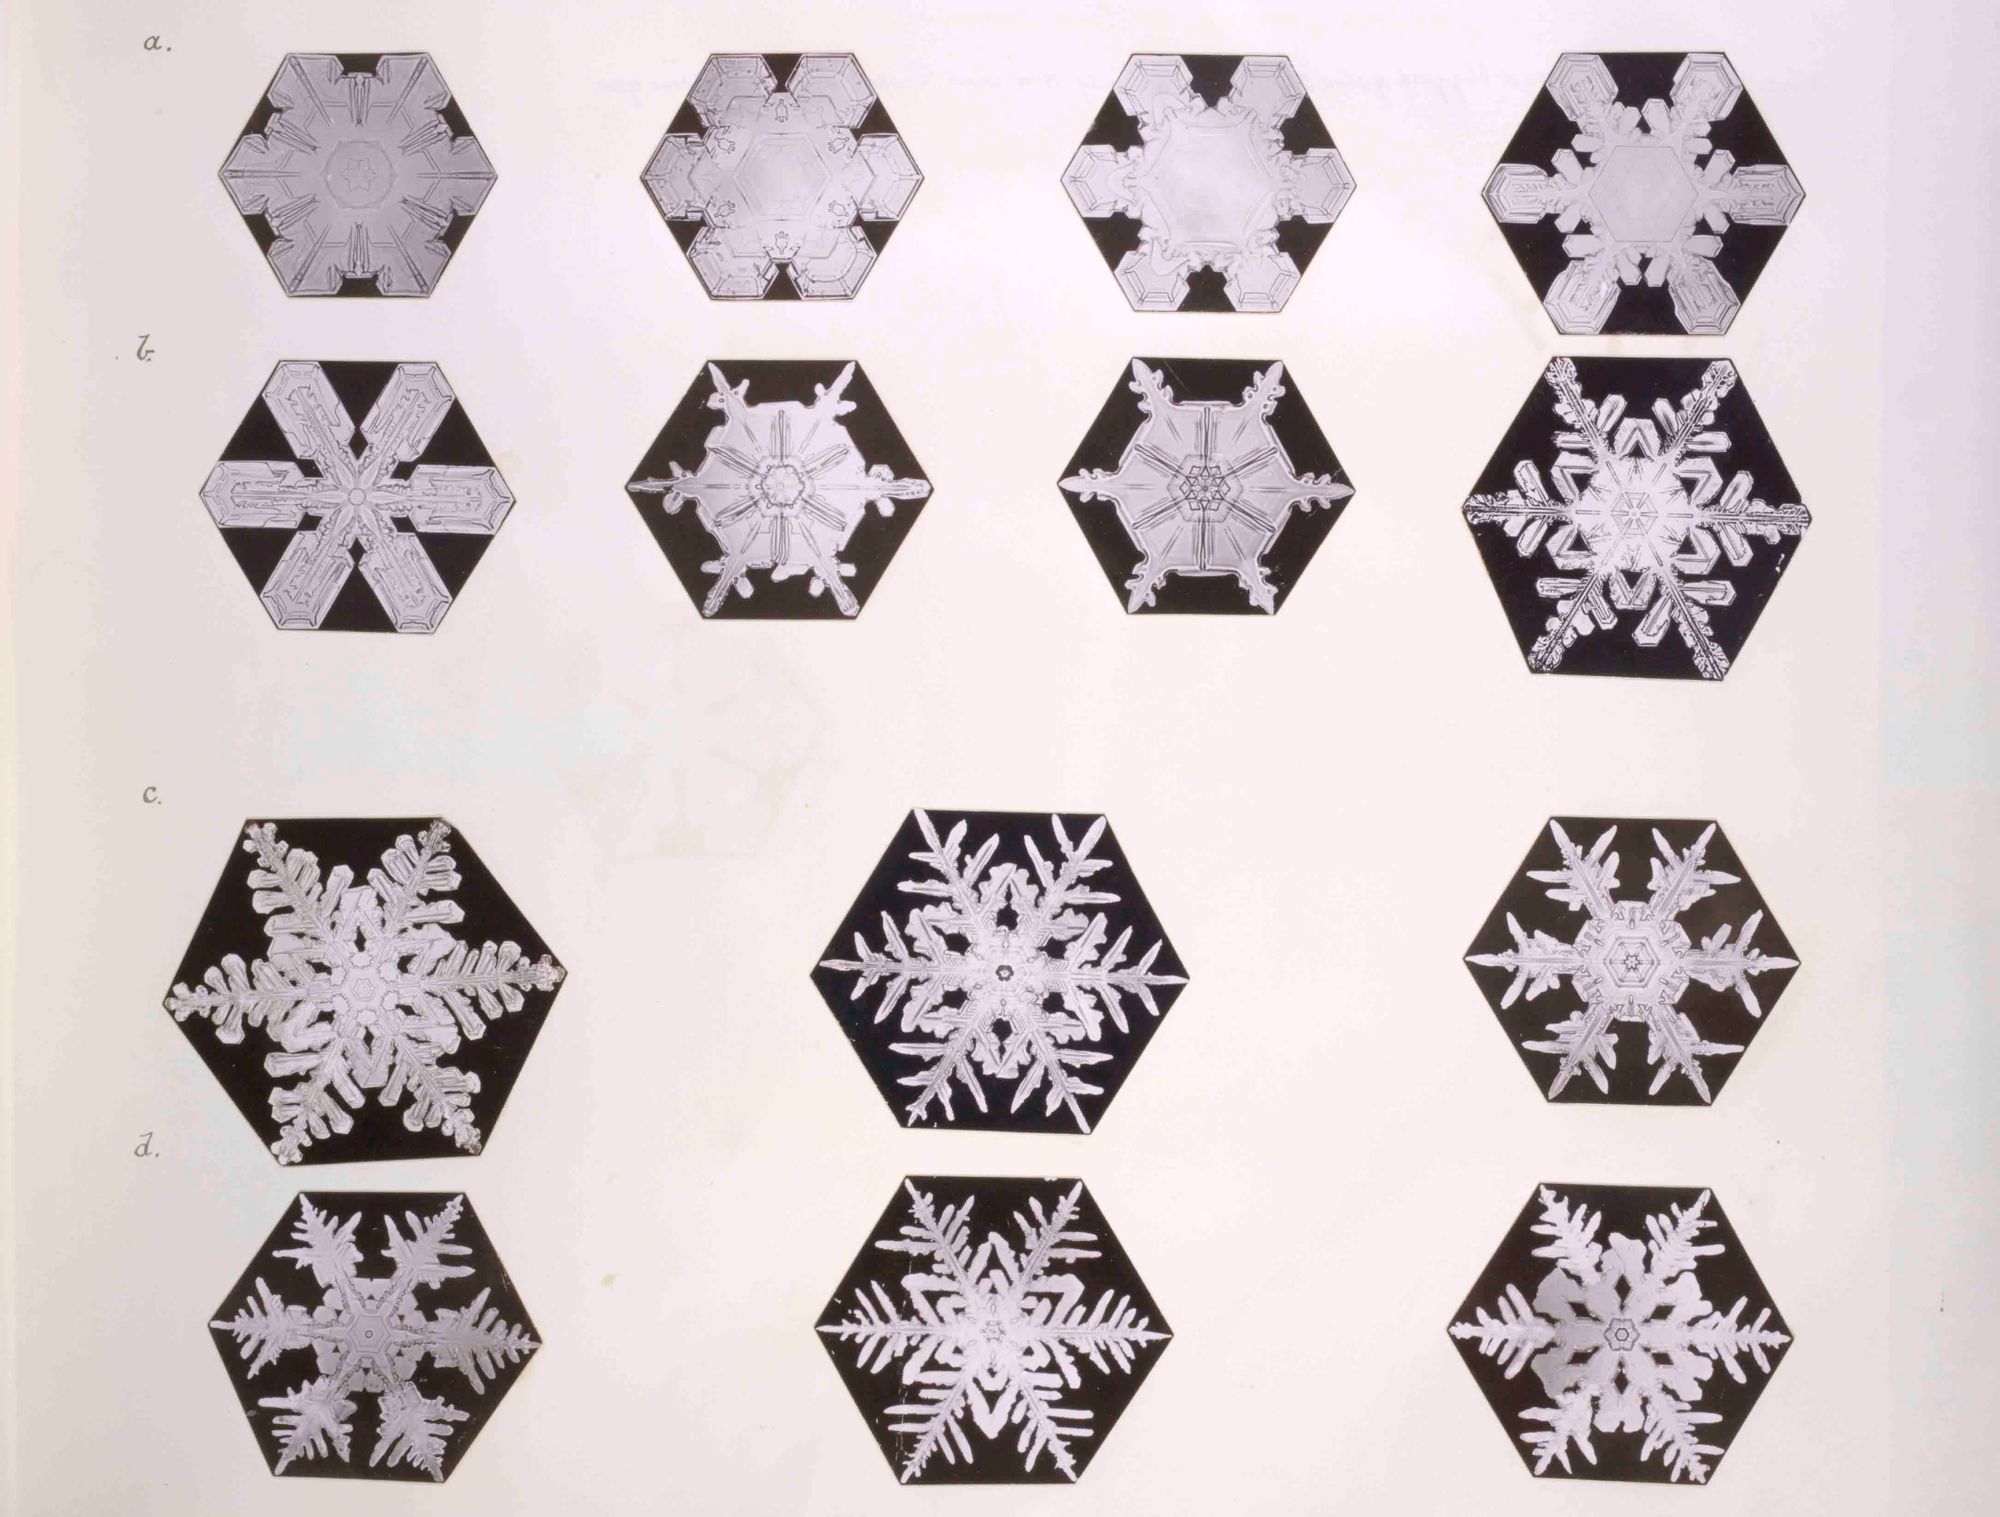 Watch snowflakes in the winter heat!